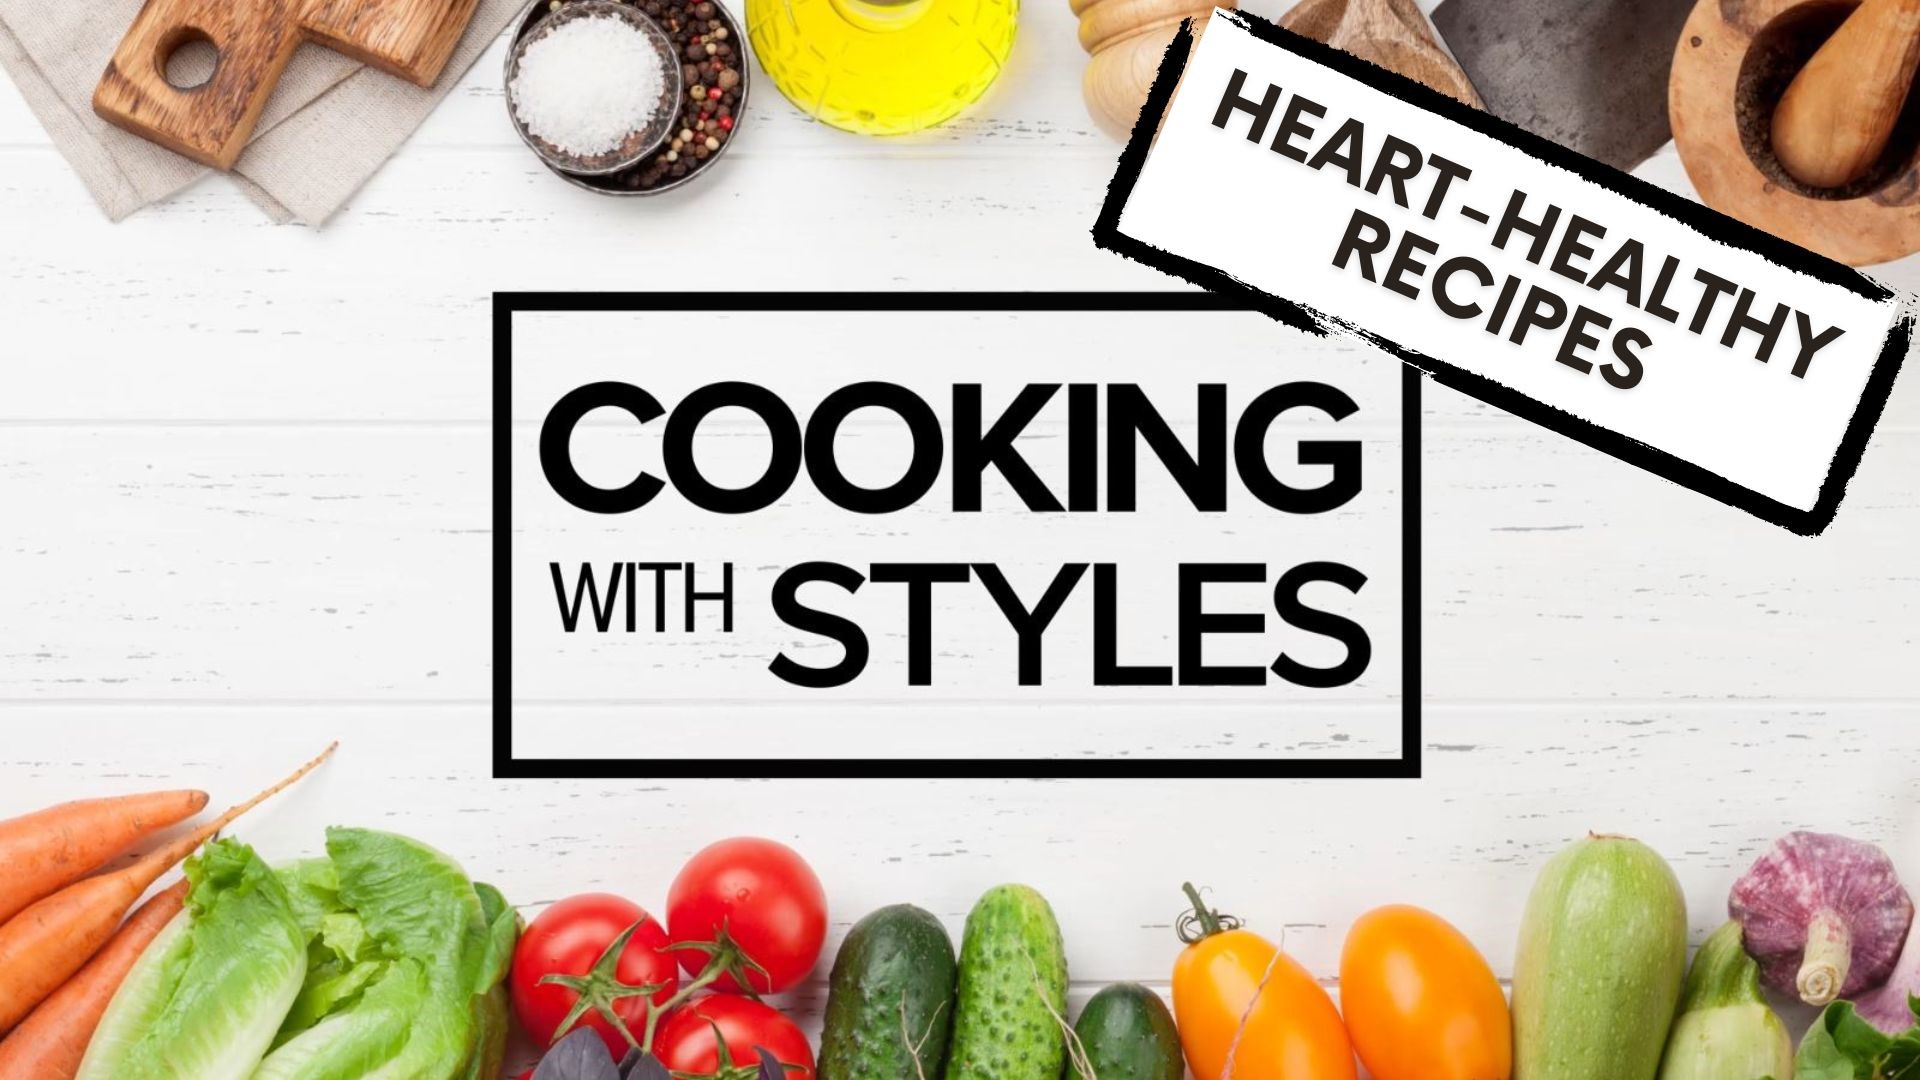 Shawn Styles shares heart-healthy meal ideas. From delicious fish recipes to white bean soup and even fried chicken, he shares healthier takes on favorites.